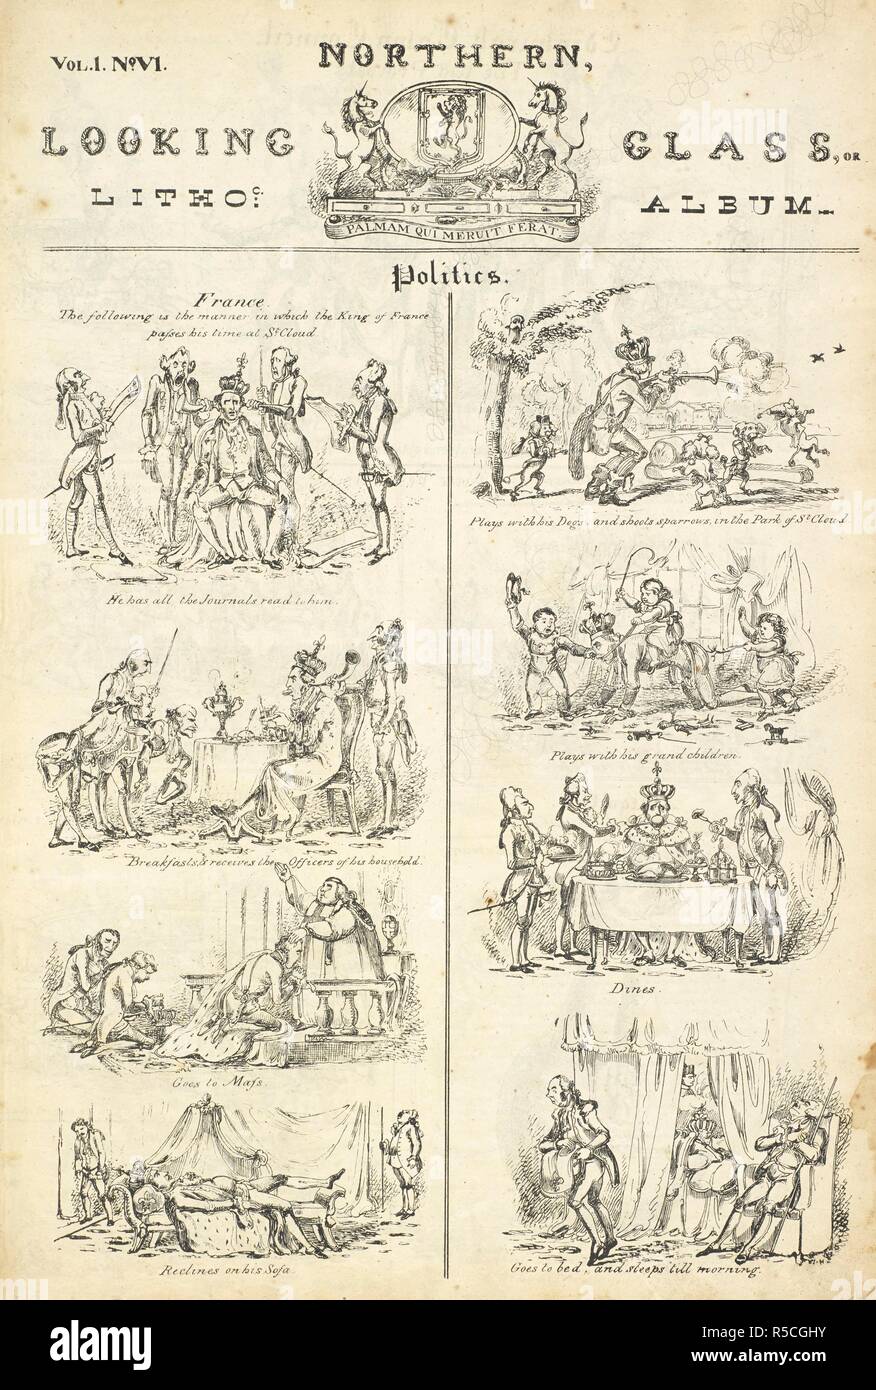 A cartoon strip mocking the French monarch's life of idleness and luxury. Northern looking glass. Glasgow. : Printed, published, and sold by J. Watson, and sold by R. Ackermann, ... London: by C. Smith & Co. & E. West & Co. Edinbh. and by R. Griffin & Co. ..., 1825. Source: P.P.6223.dba no.6, page 1. Language: English. Author: HEATH, WILLIAM. Stock Photo